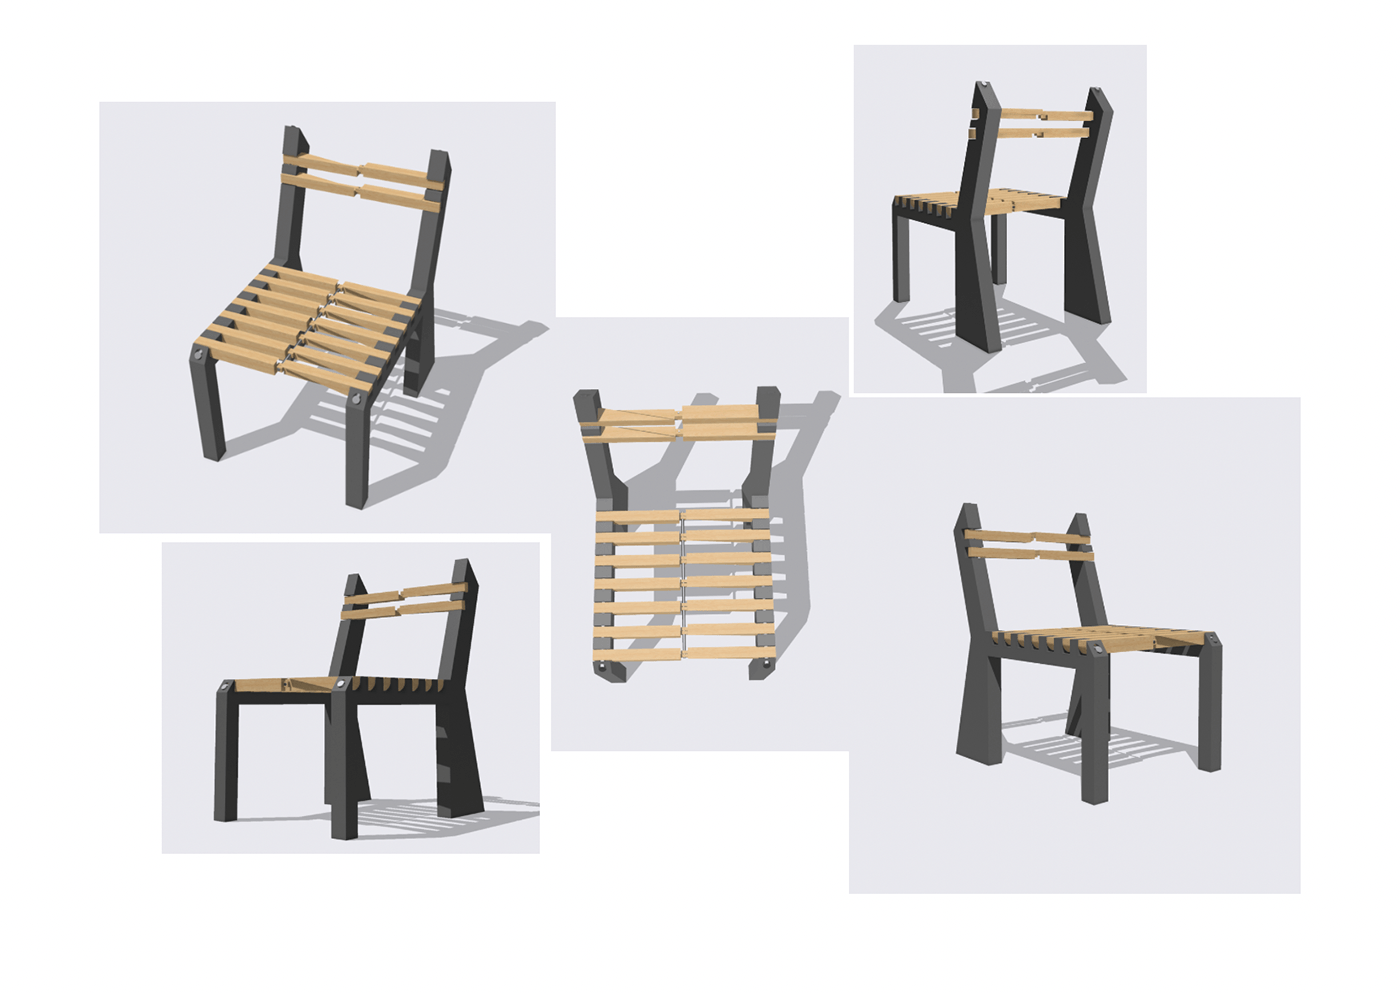 product design  space saving Foldable wooden furniture chair statement design smart solution 3d modeling